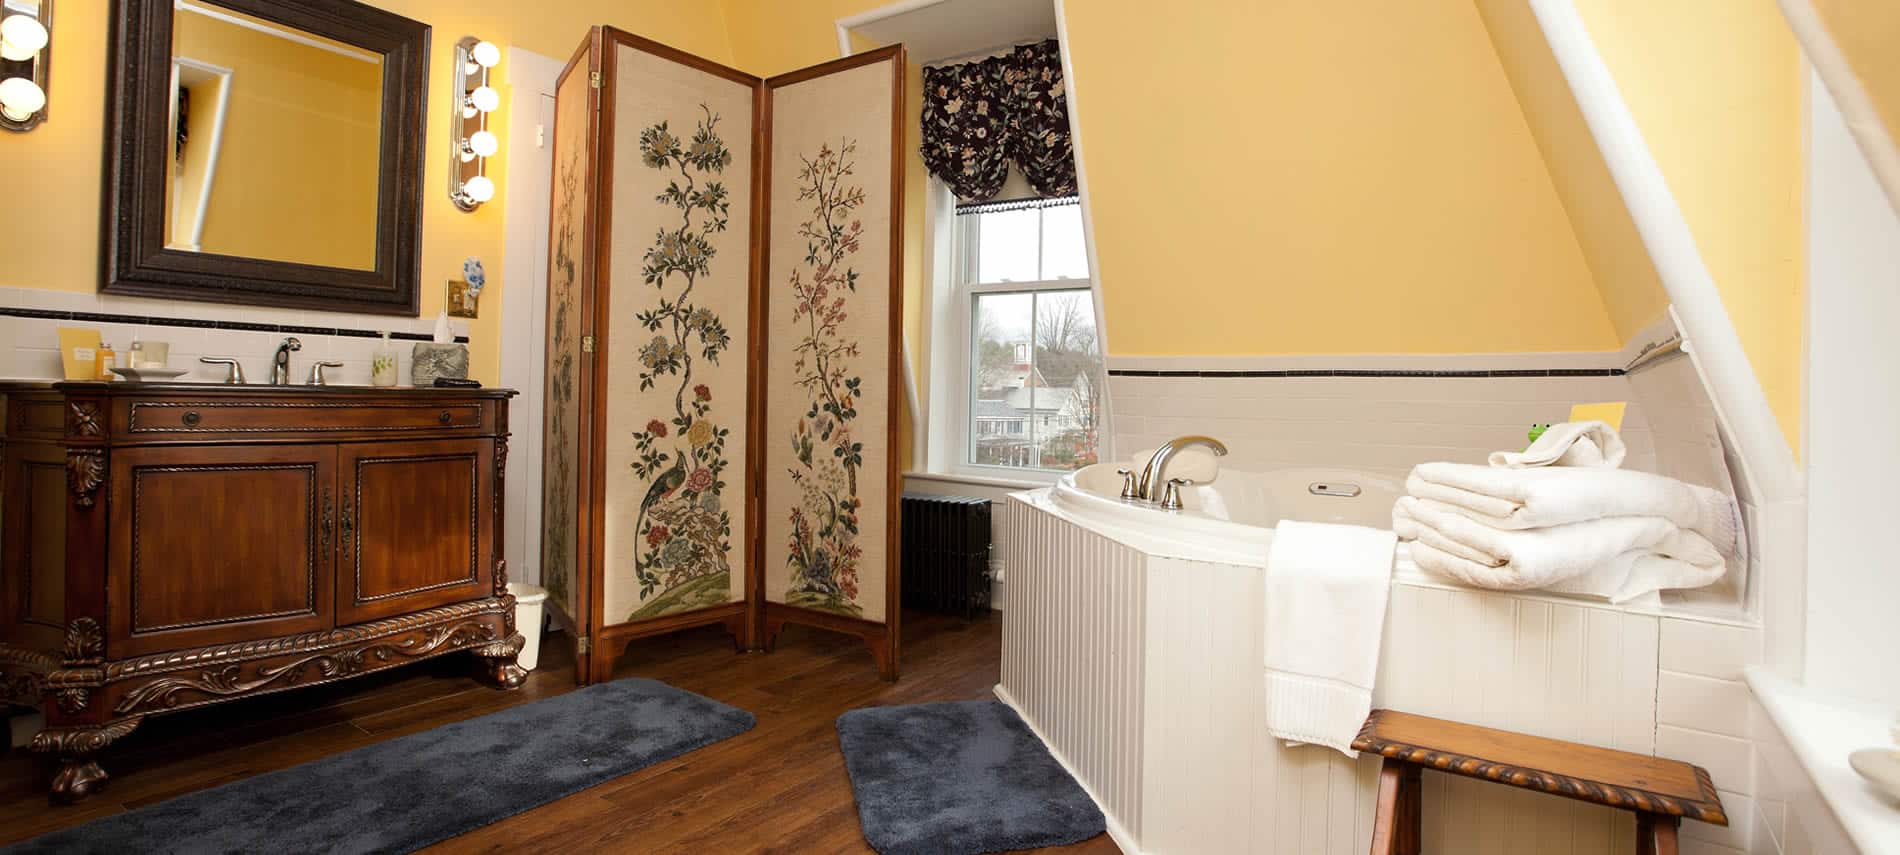 Princess Victoria guest bath with yellow walls, wood floors, antique vanity with sink and white tub